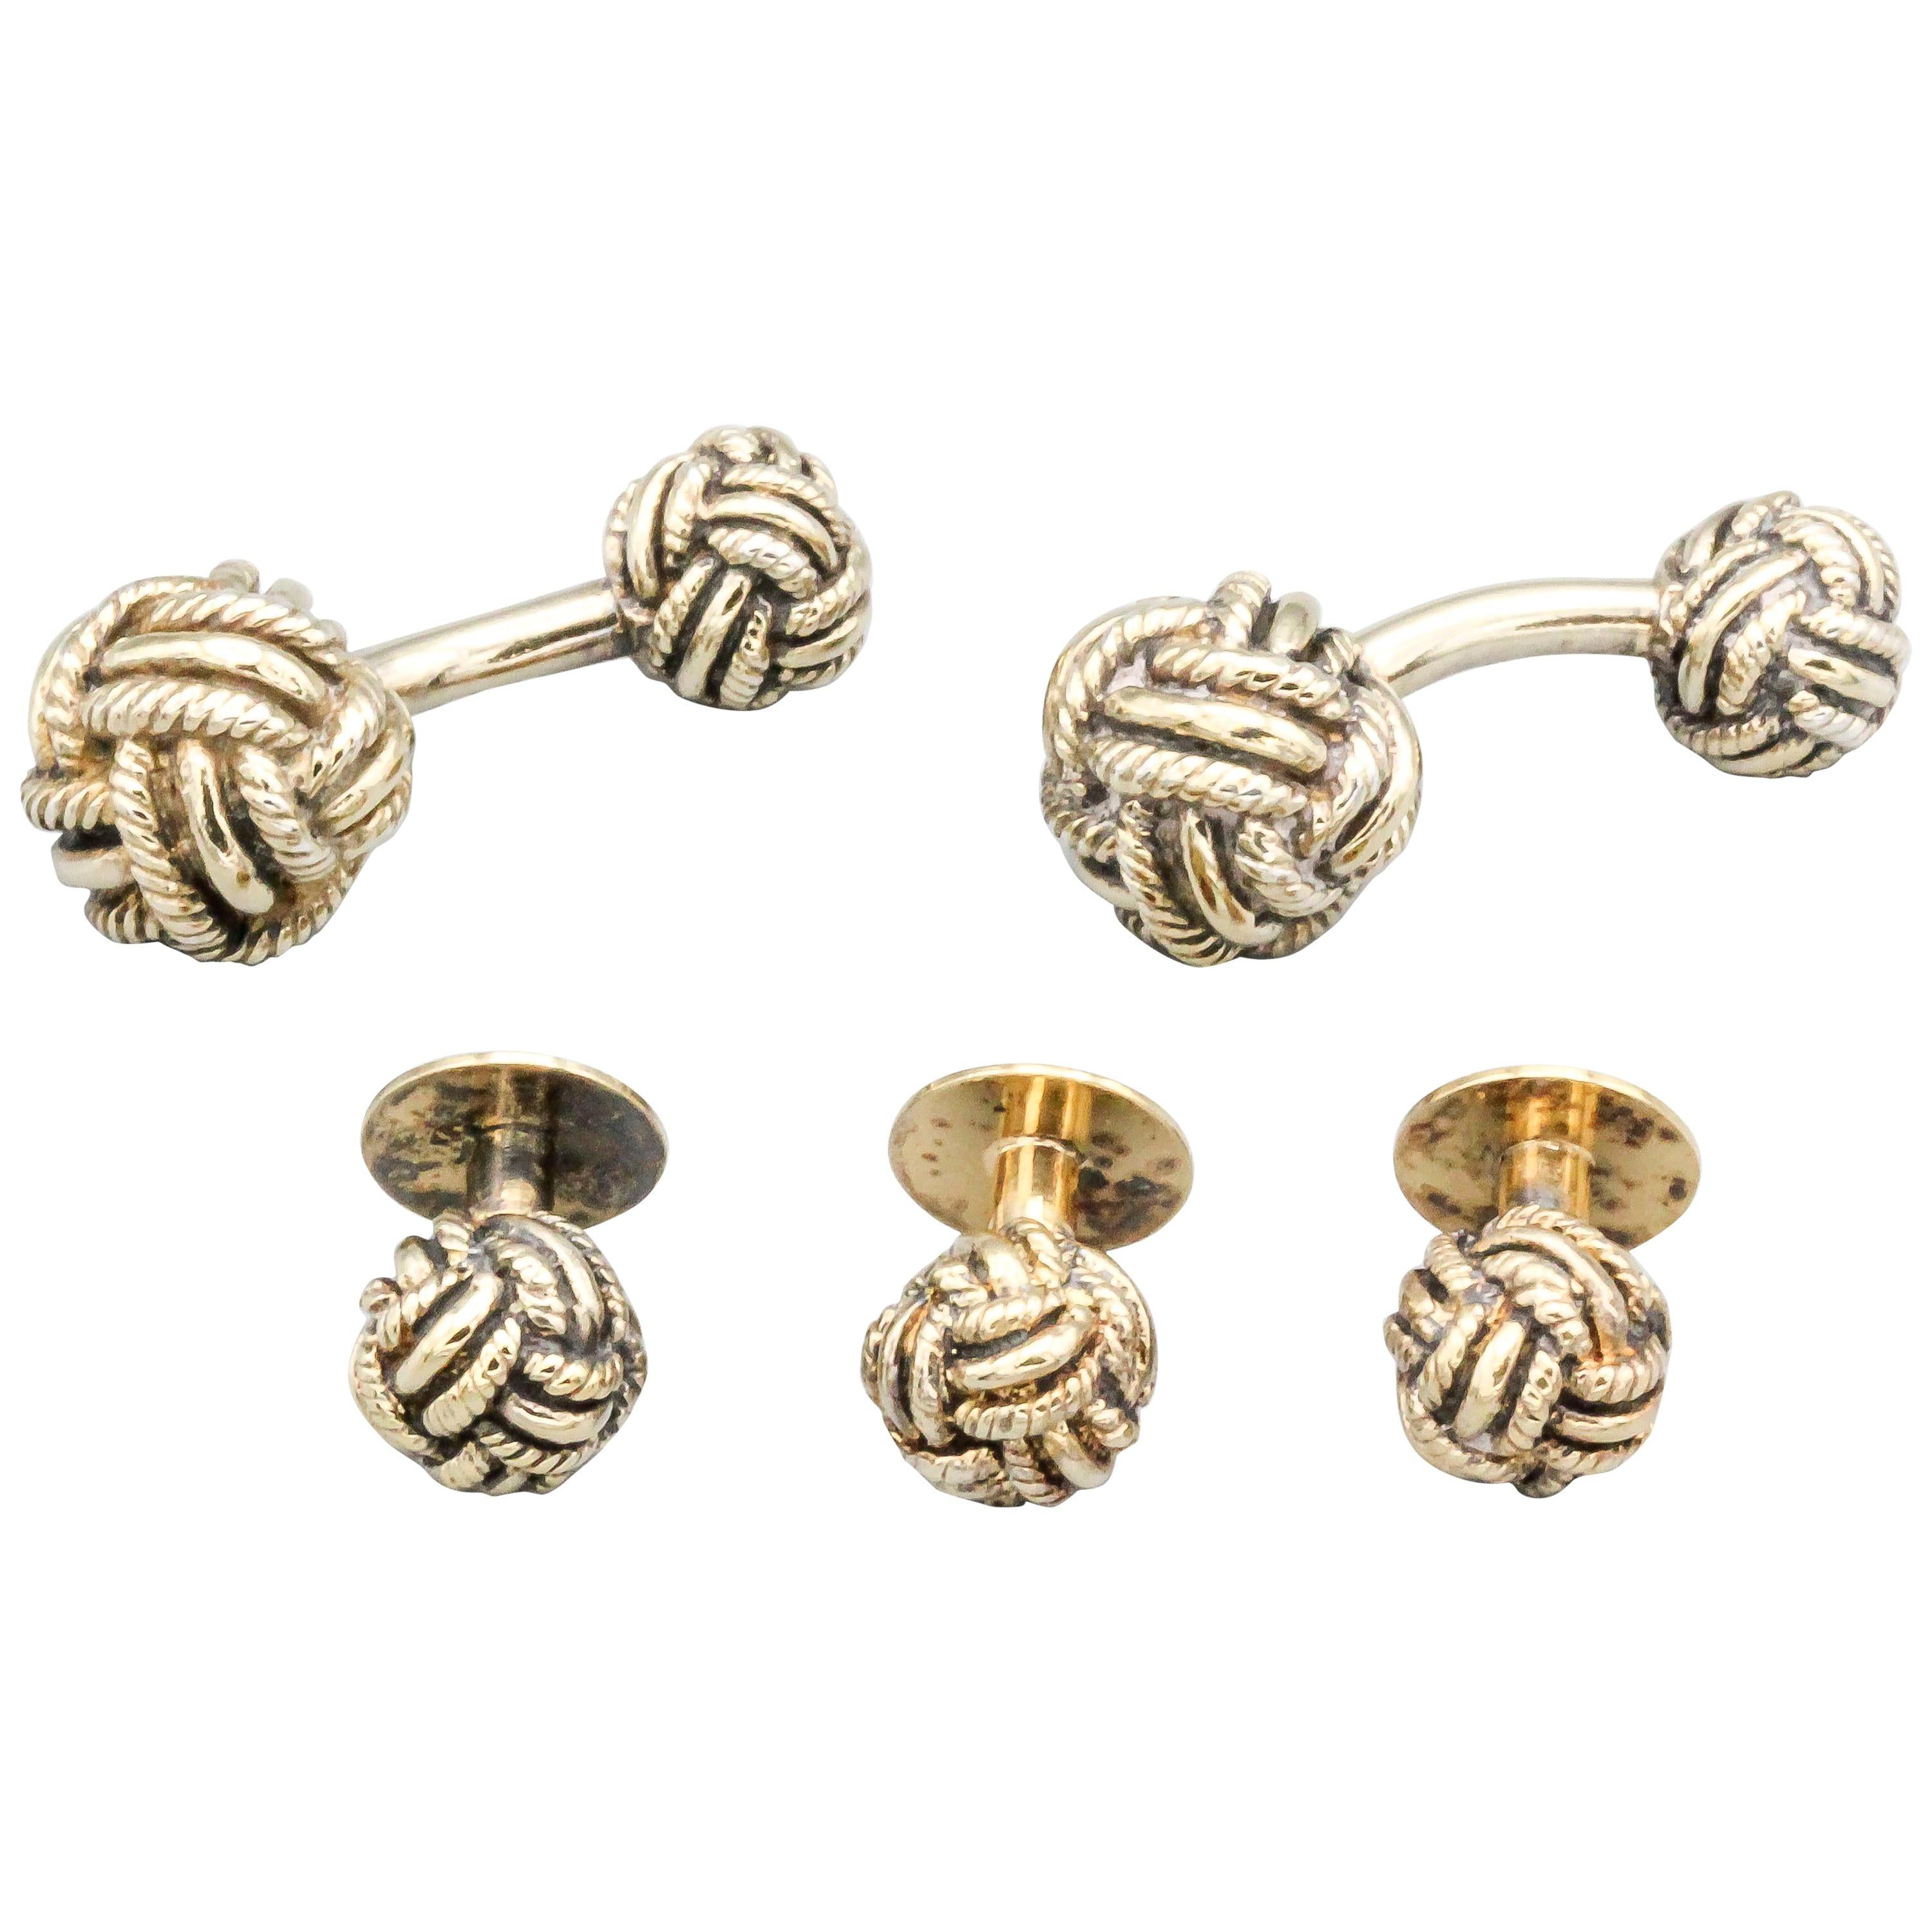 English Sterling Silver Knot Cufflinks and 3 Stud Set